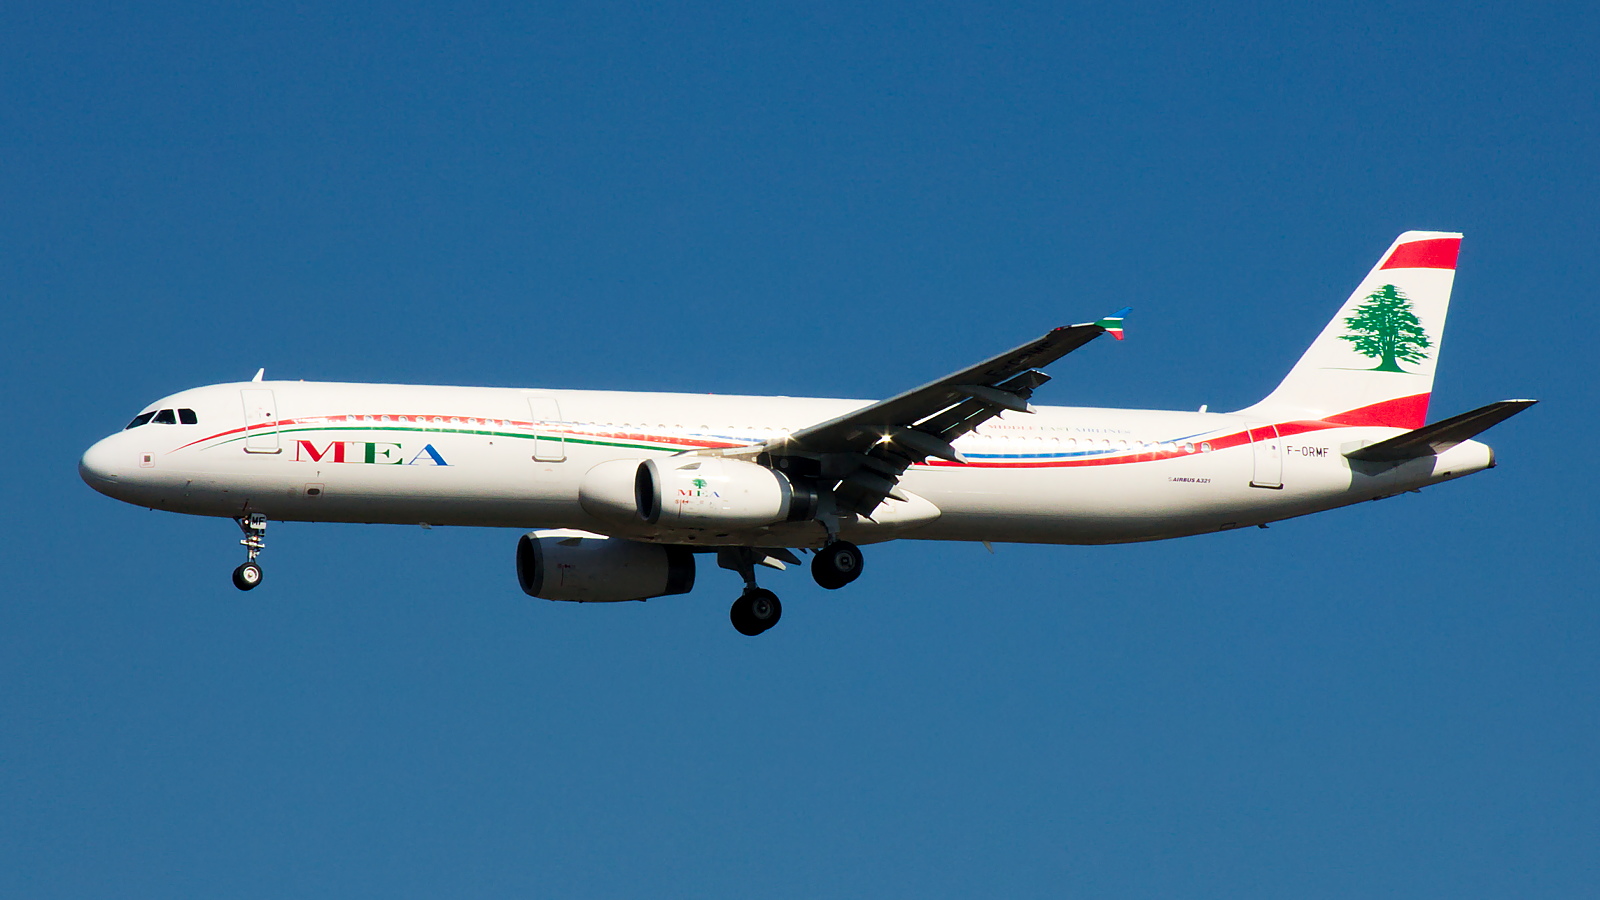 F-ORMF ✈ Middle East Airlines Airbus A321-231 @ London-Heathrow